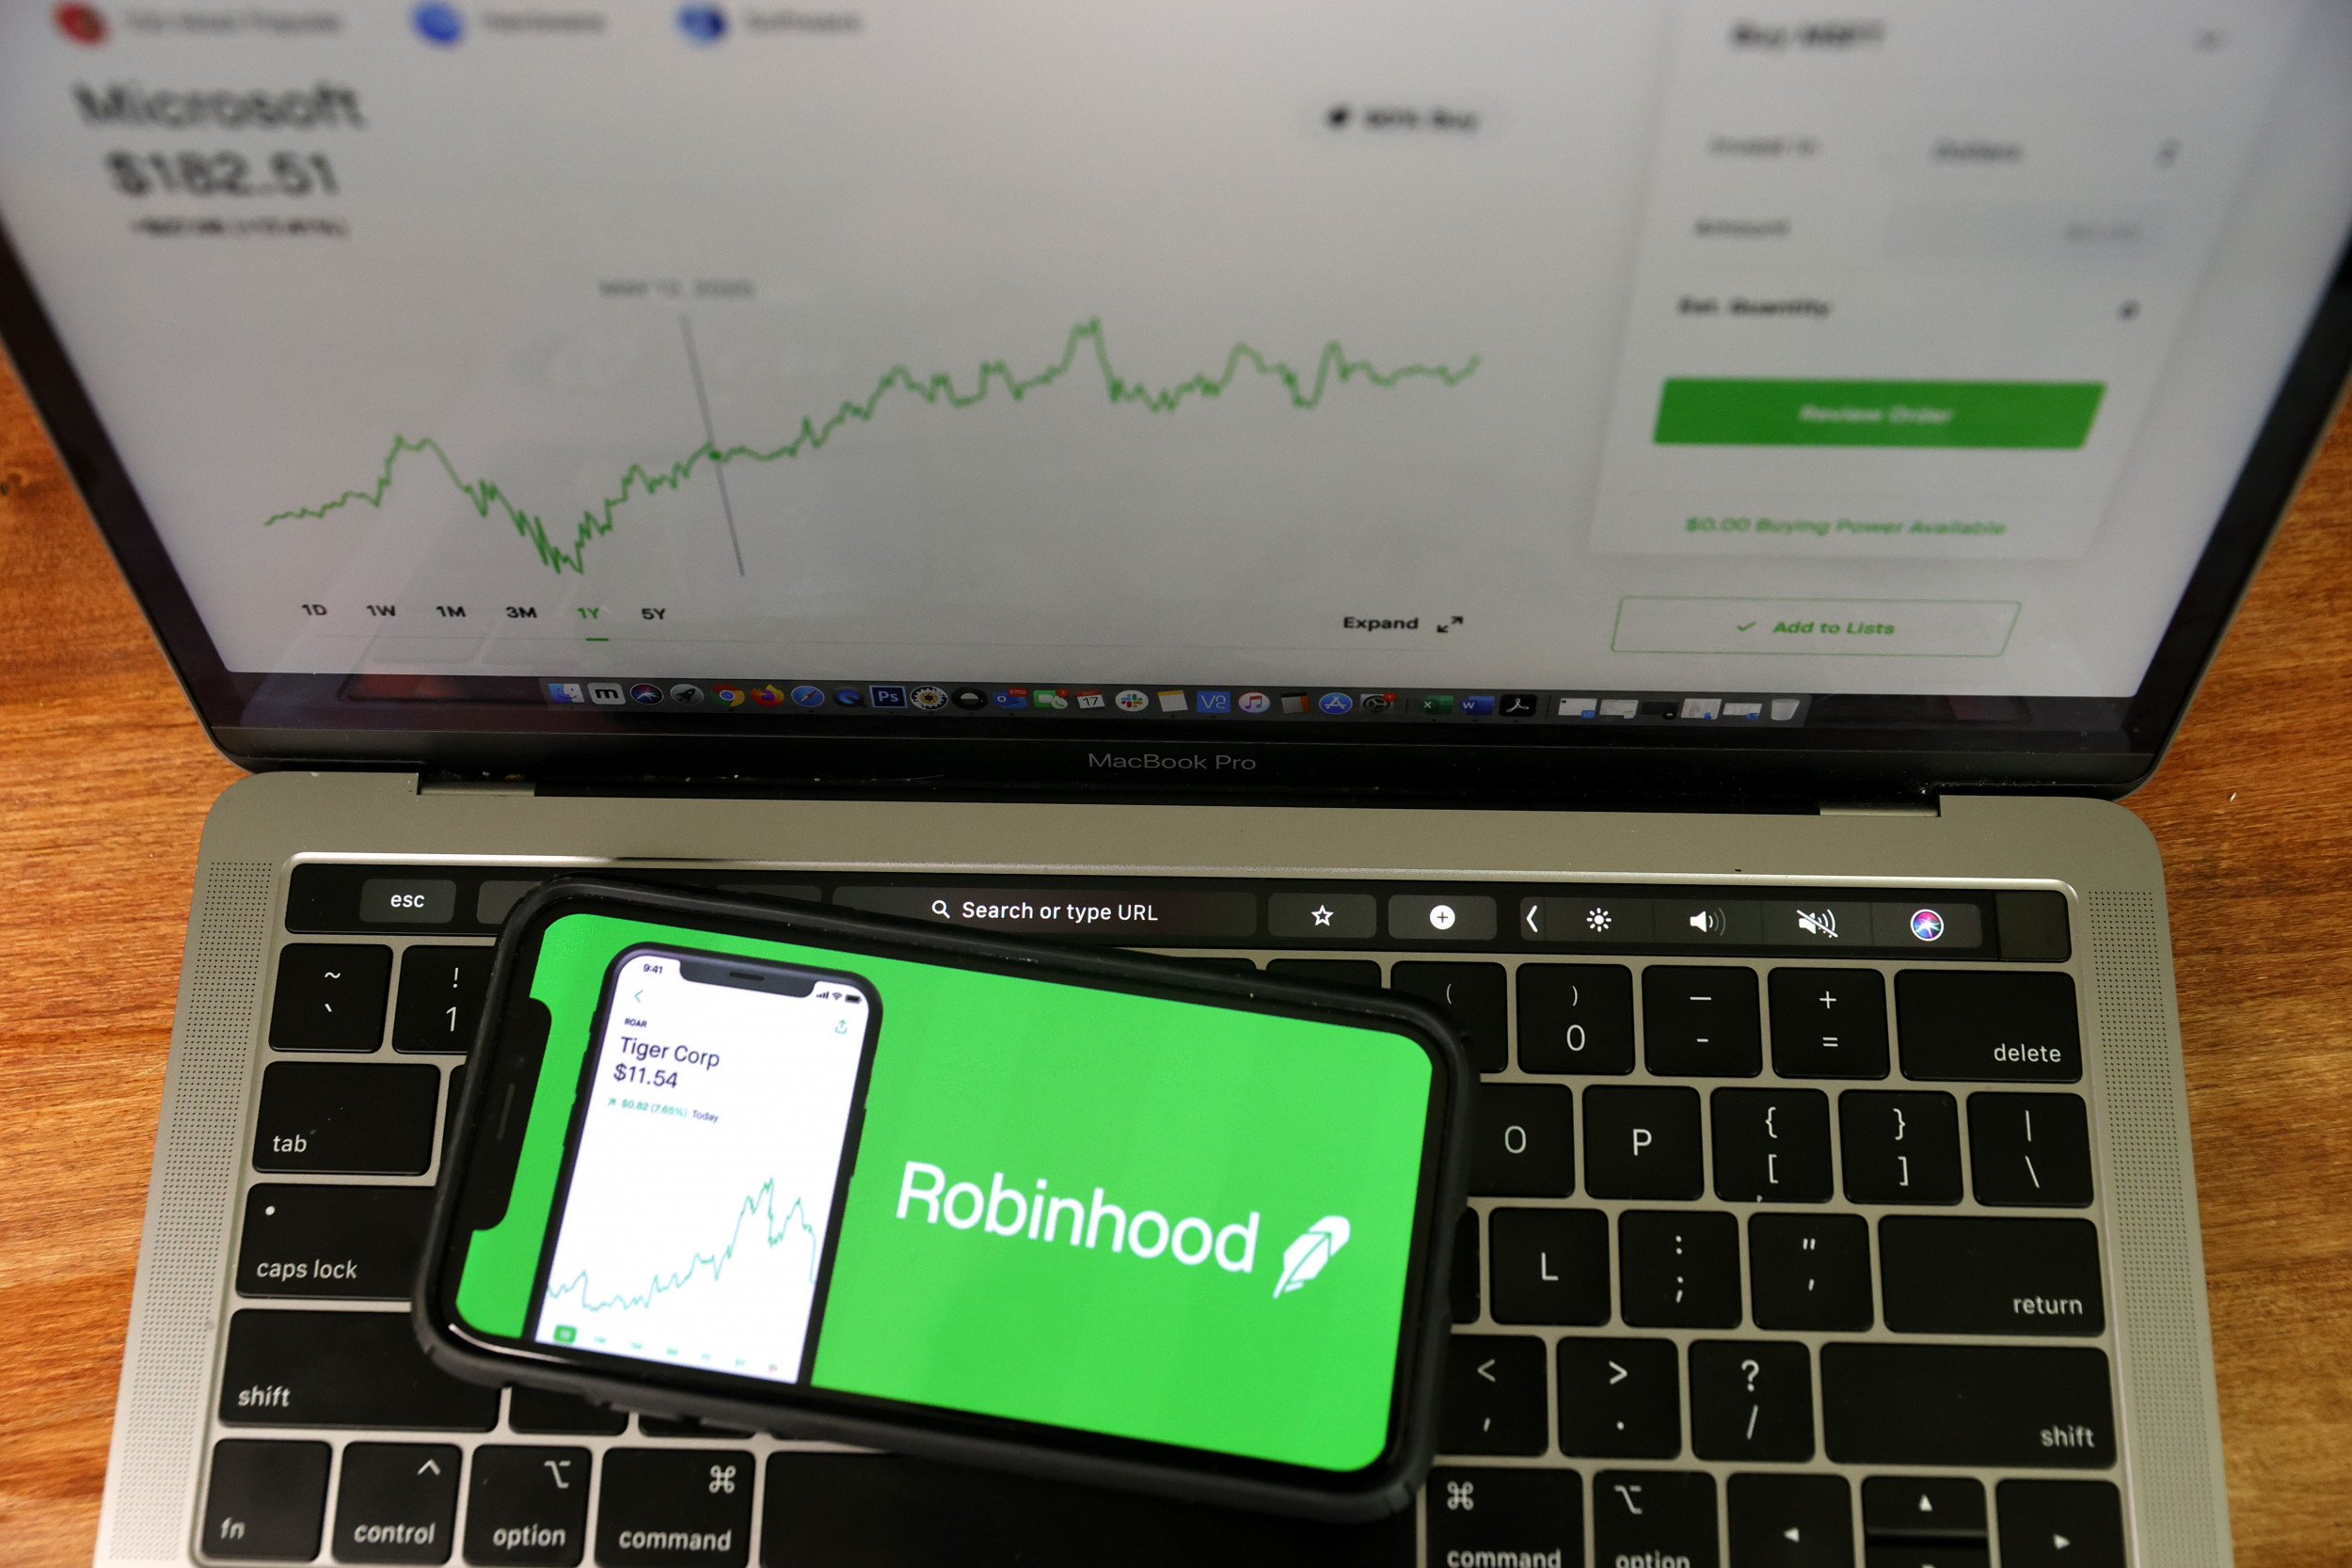 Robinhood App Blocks Gme Stock Trading Is Flooded With 1 Star Reviews